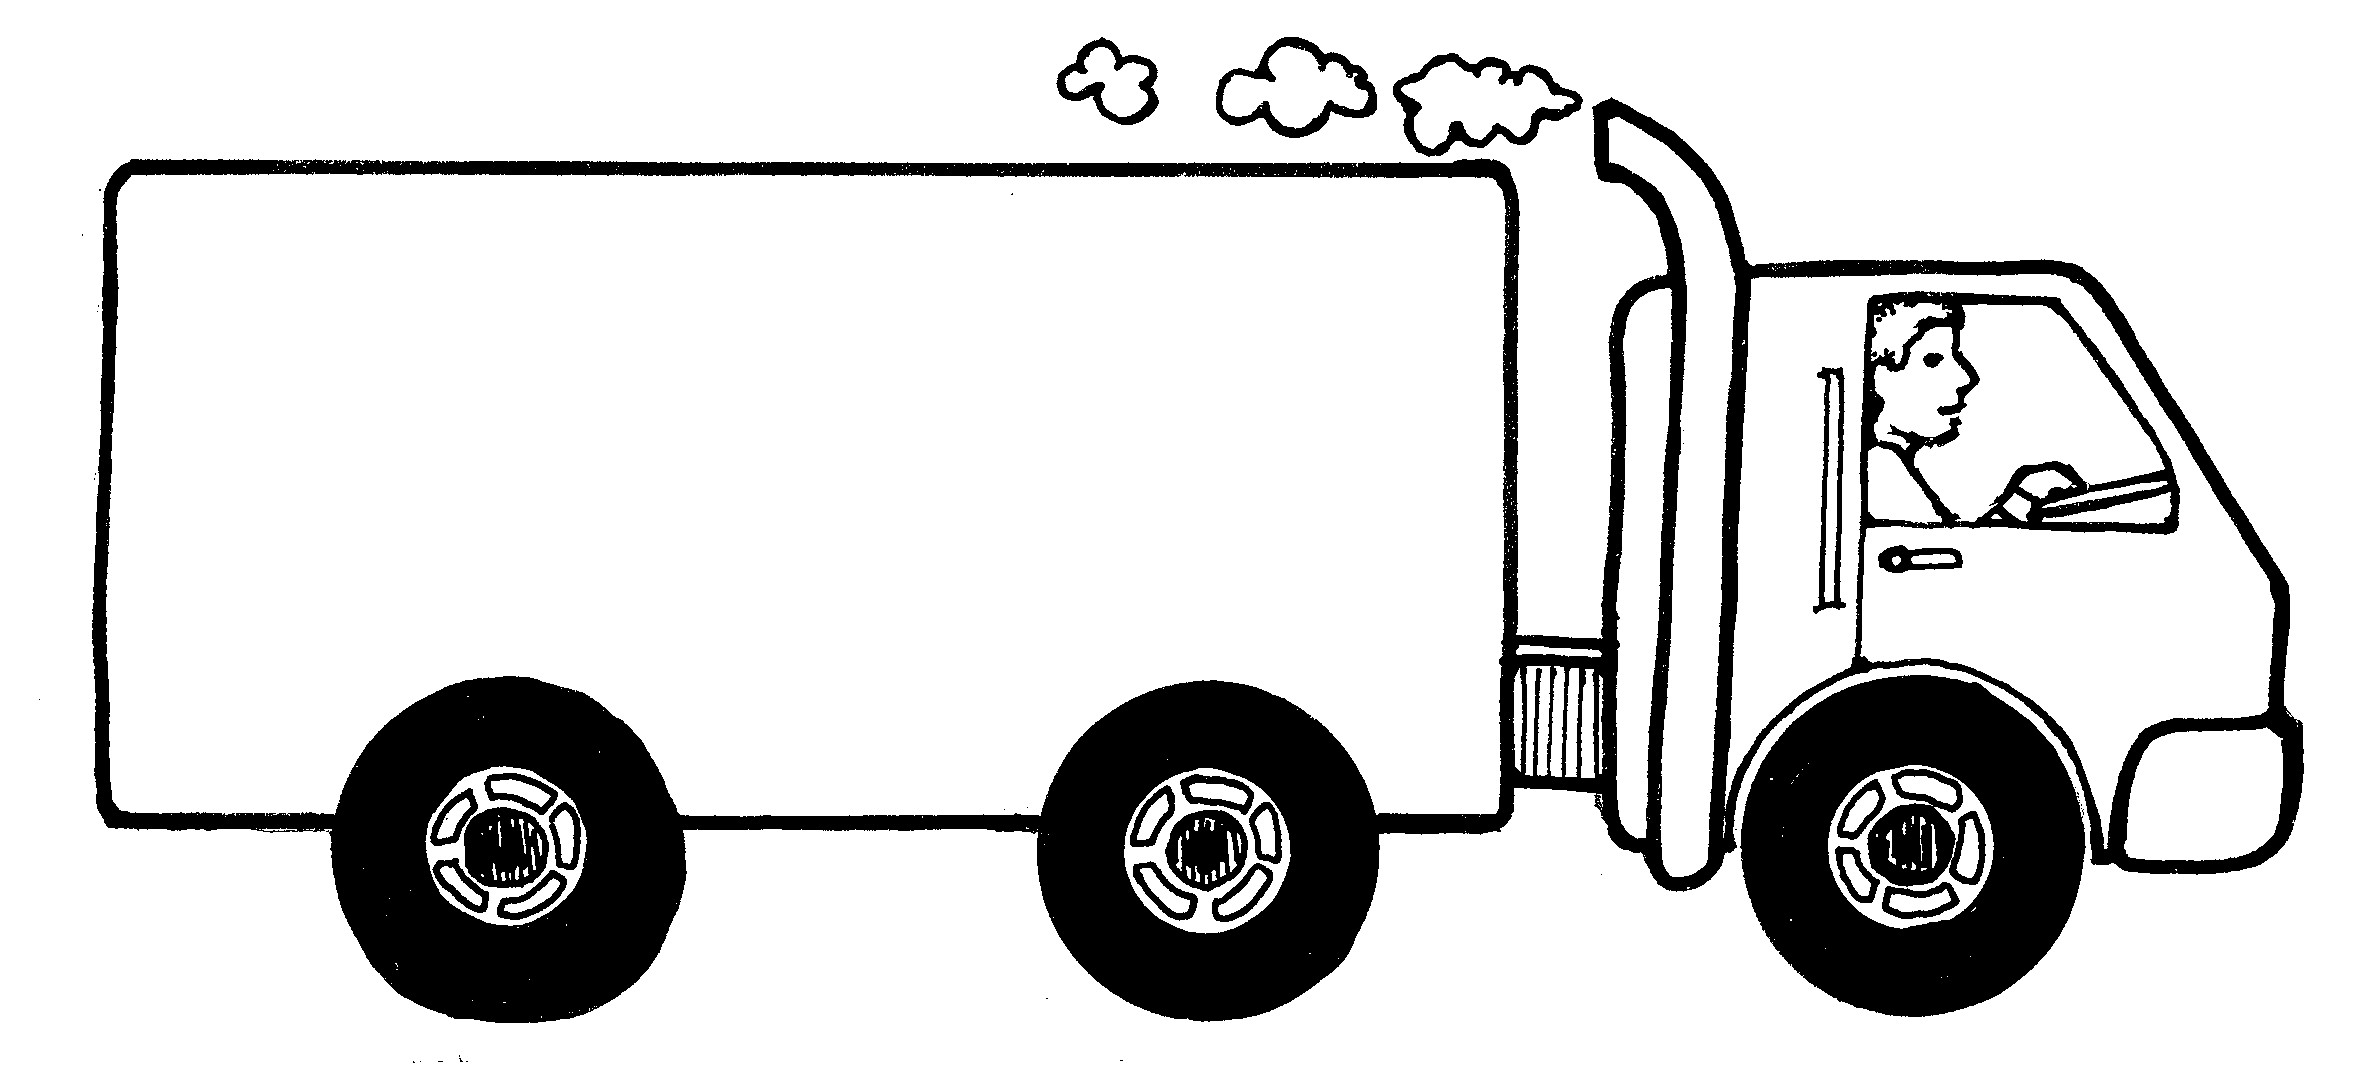 free car and truck clip art - photo #16